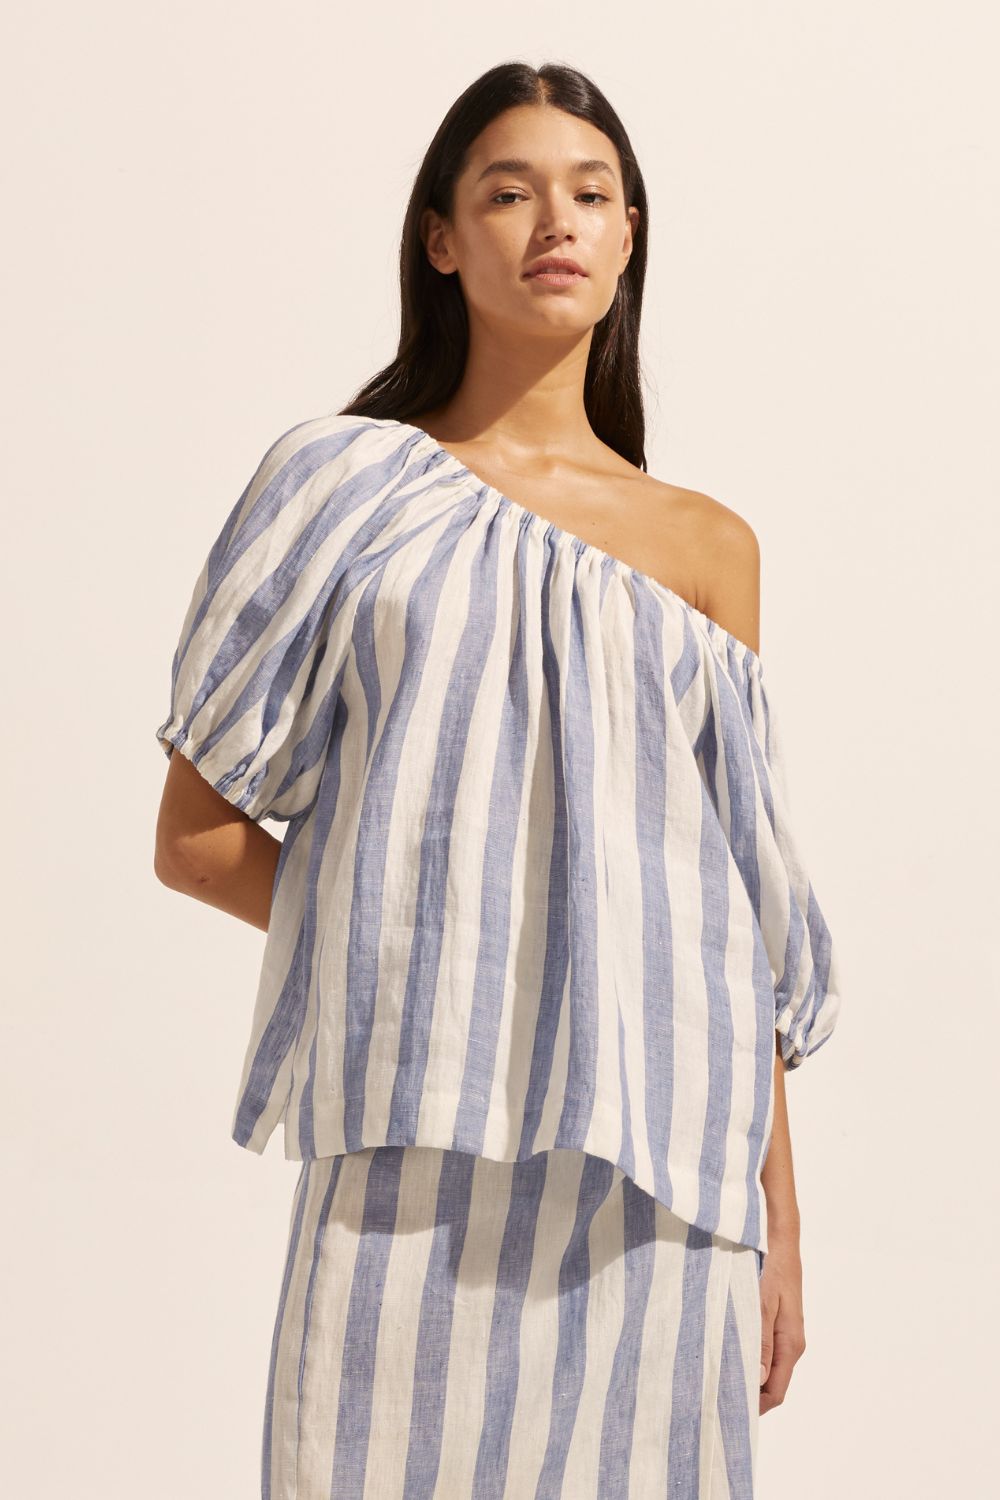 blue and white stripe, top, off the shoulder, mid length sleeve, front image